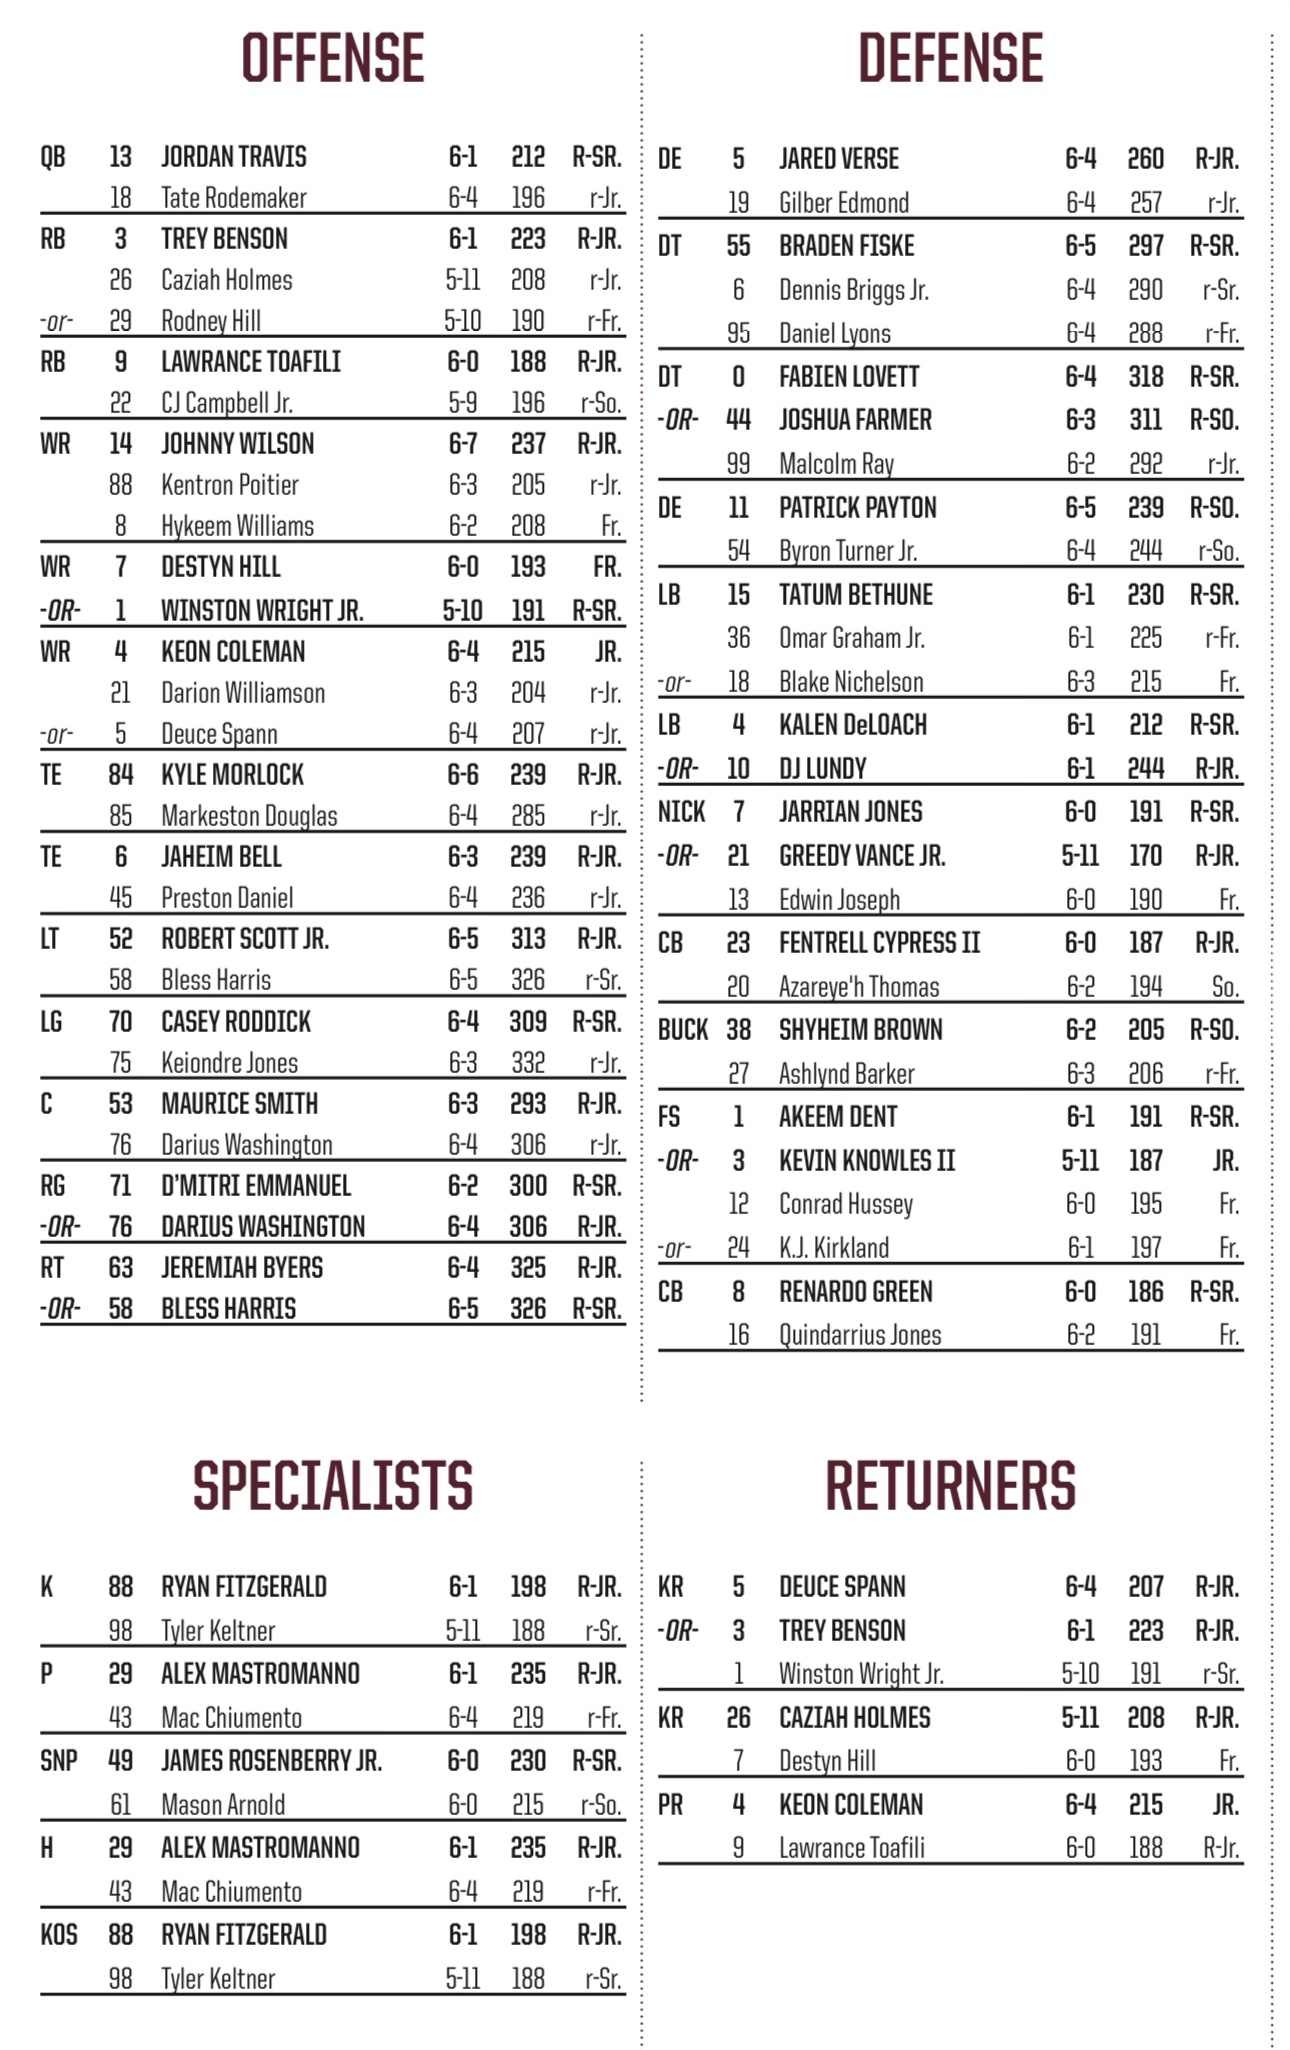 Brendan Sonnone on X: "FSU releases its official depth chart. 12 ORs. 8  freshmen. And a few surprises. Full Depth Chart here:  https://t.co/UuSwGaQCM4 https://t.co/lIe9tfCb16" / X